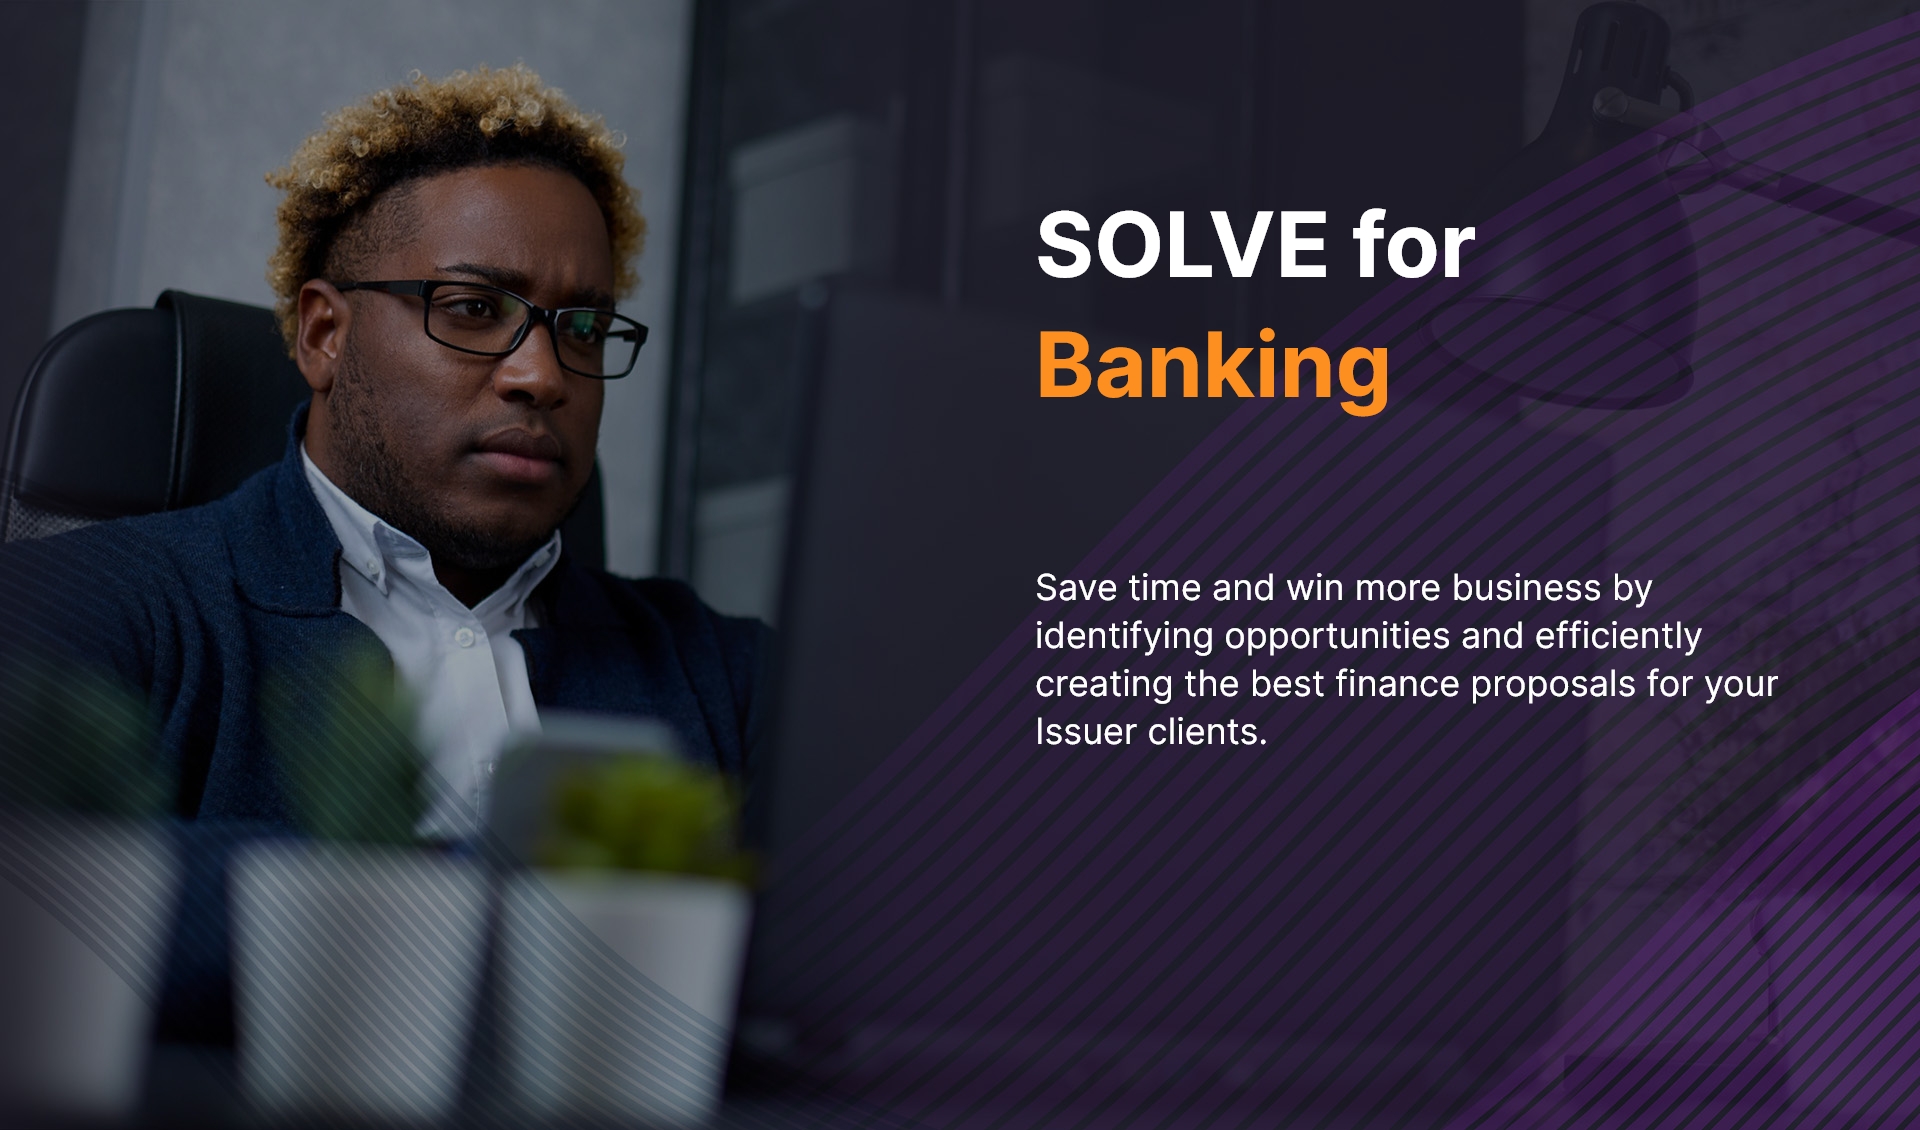 SOLVE for Banking